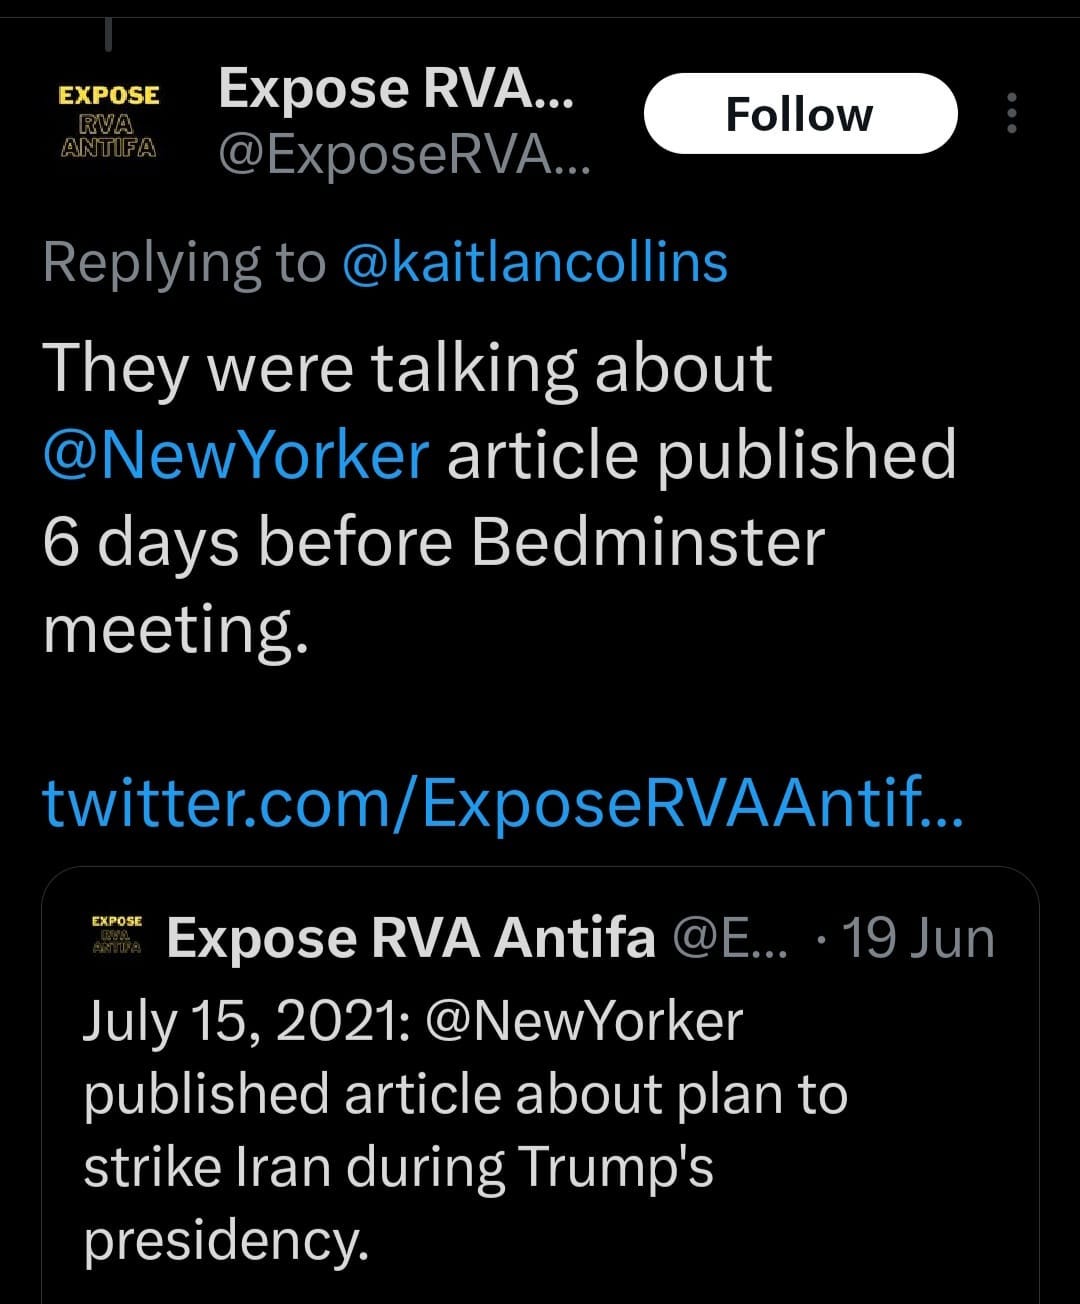 May be an image of text that says 'EXPOSE Follow Expose RVA... @ExposeRVA... Replyingto @kaitlancollins They were talking about @NewYorker article published 6 days before Bedminster meeting. twitter.com/ExposeRAnt... EXPOSE Expose RVA Antifa @E... 19 Jun July 15, 2021: @NewYorker published article about plan to strike Iran during Trump's presidency.'